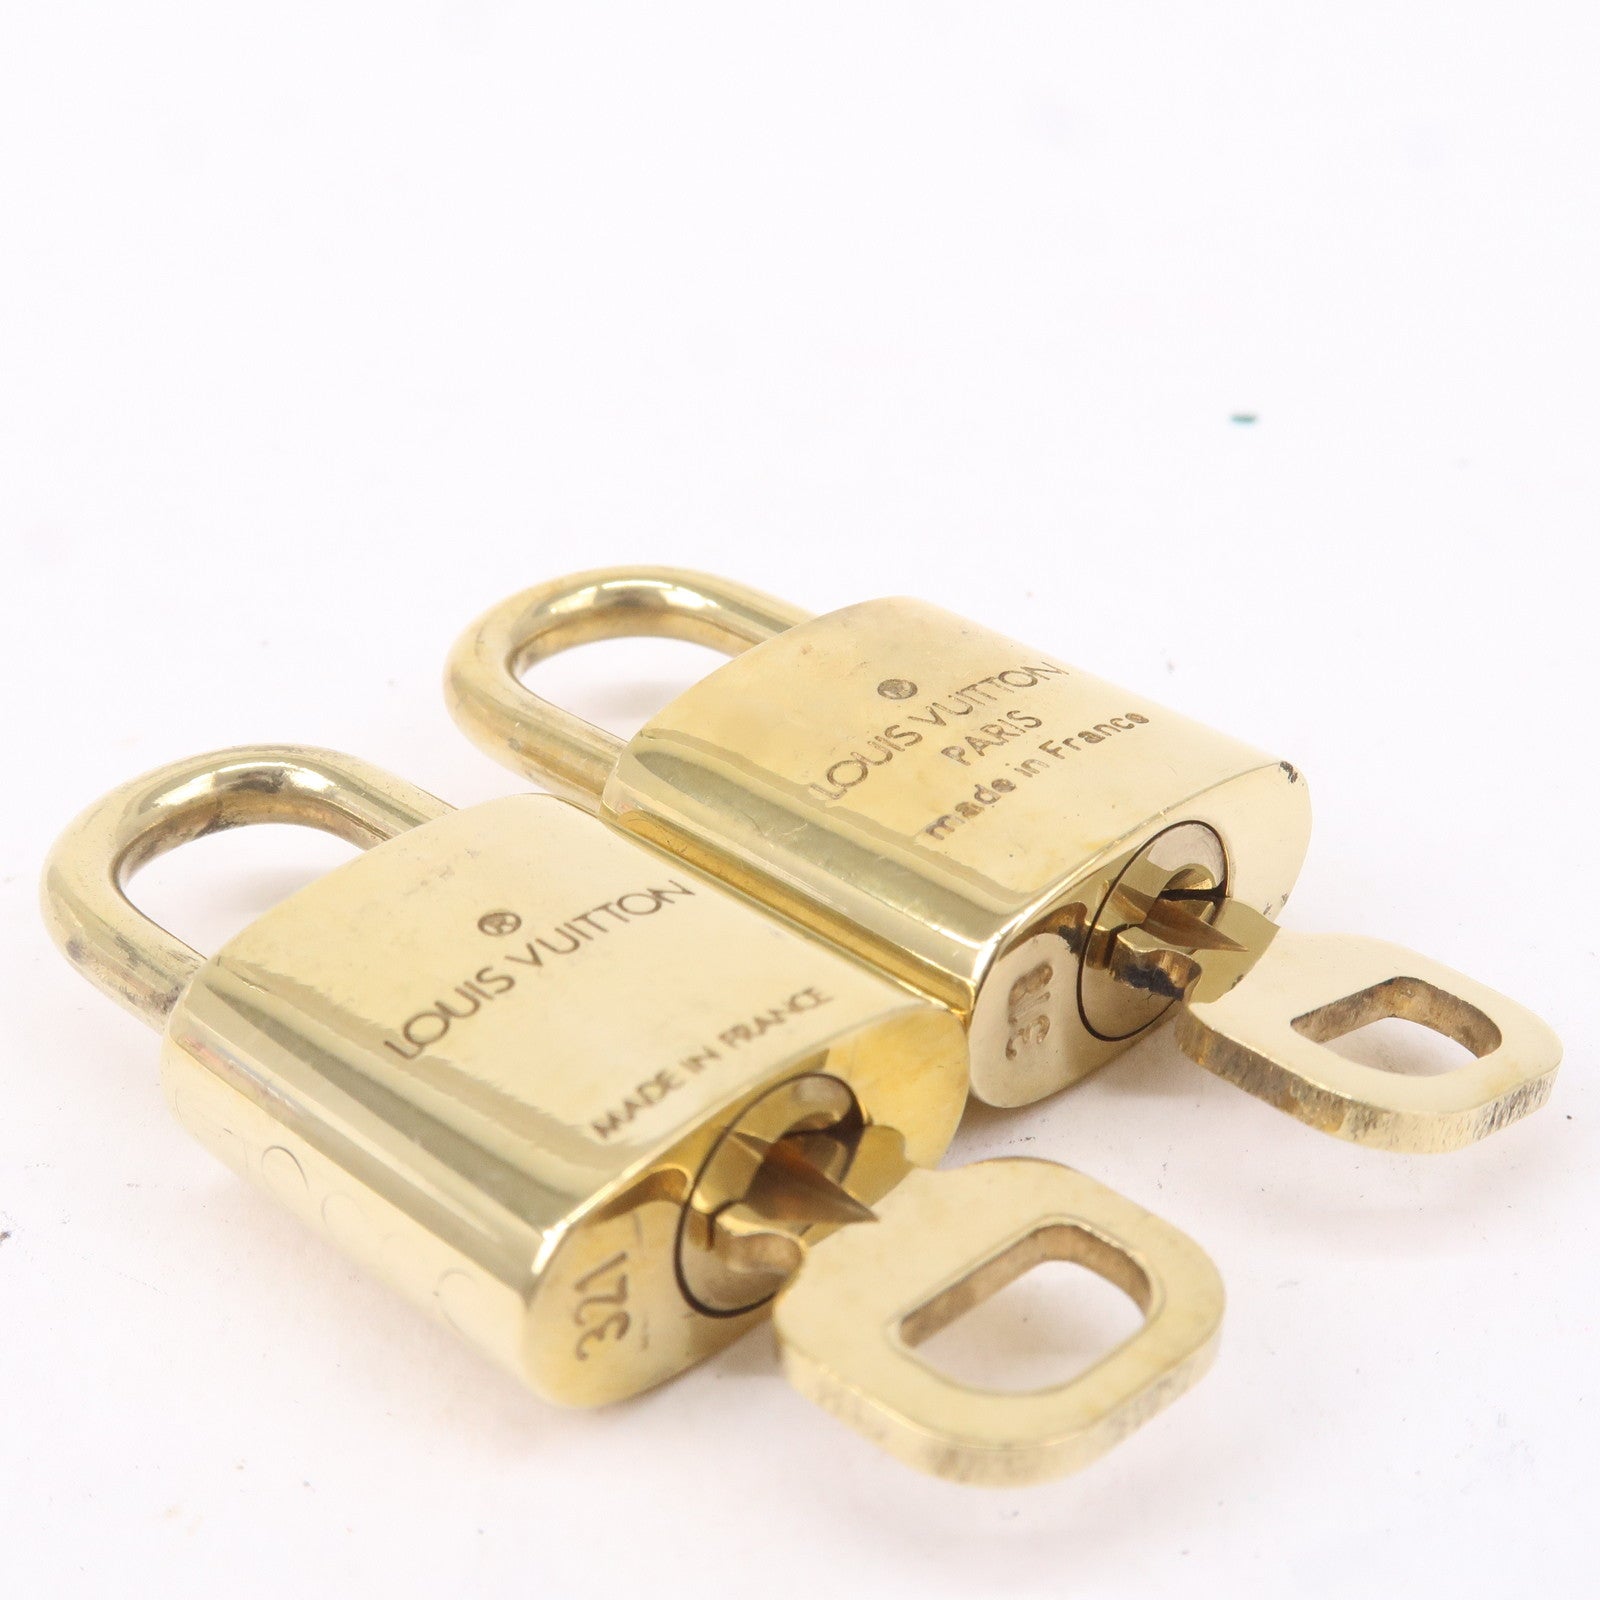 AUTHENTIC Near Mint Louis Vuitton lock and key.